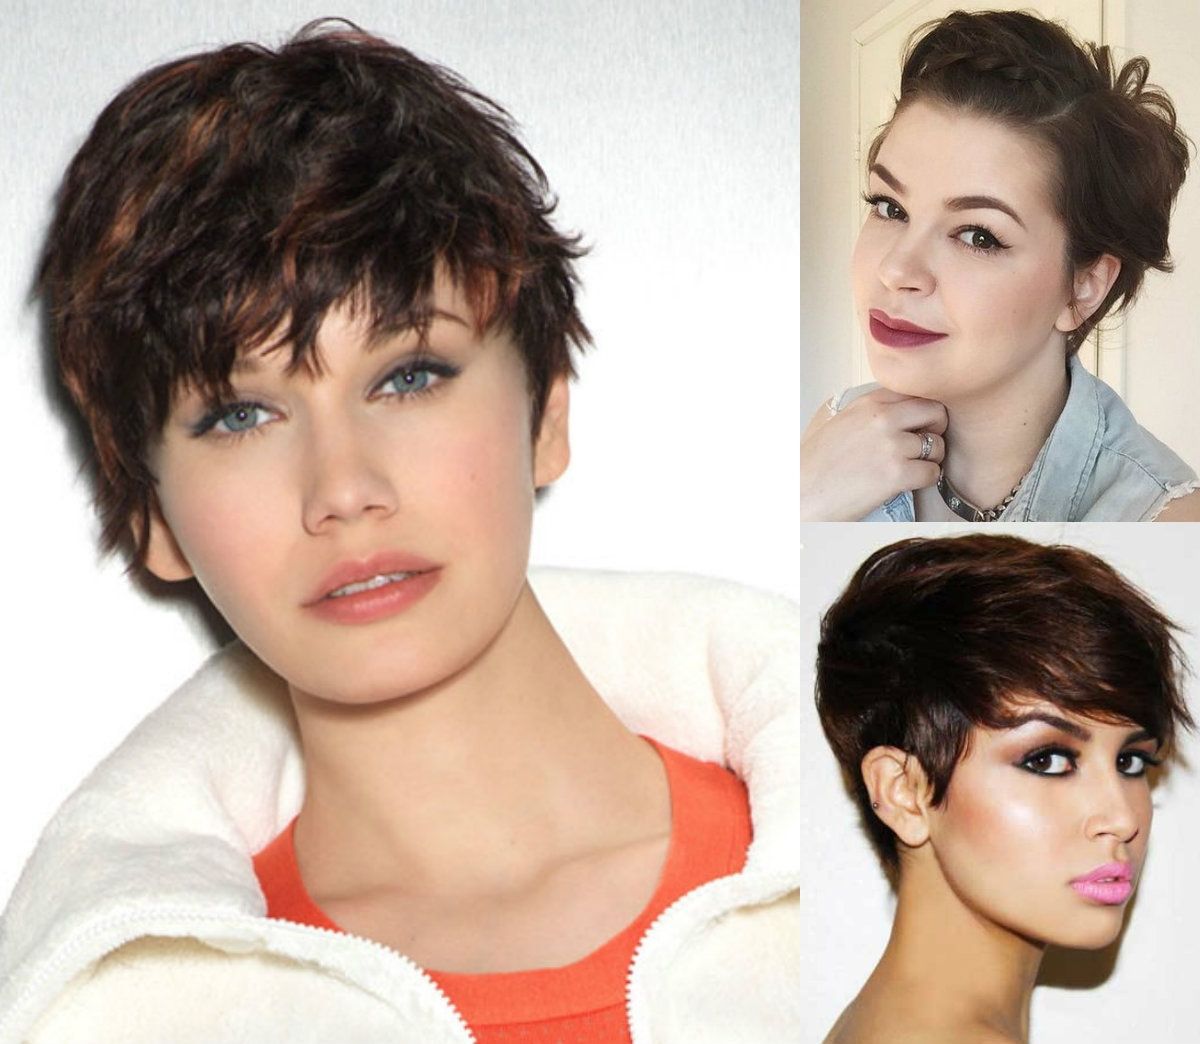 Best Pixie Haircuts For Round Faces 2017 | Hairdrome Regarding Most Recently Short Bangs Pixie Hairstyles (View 8 of 15)